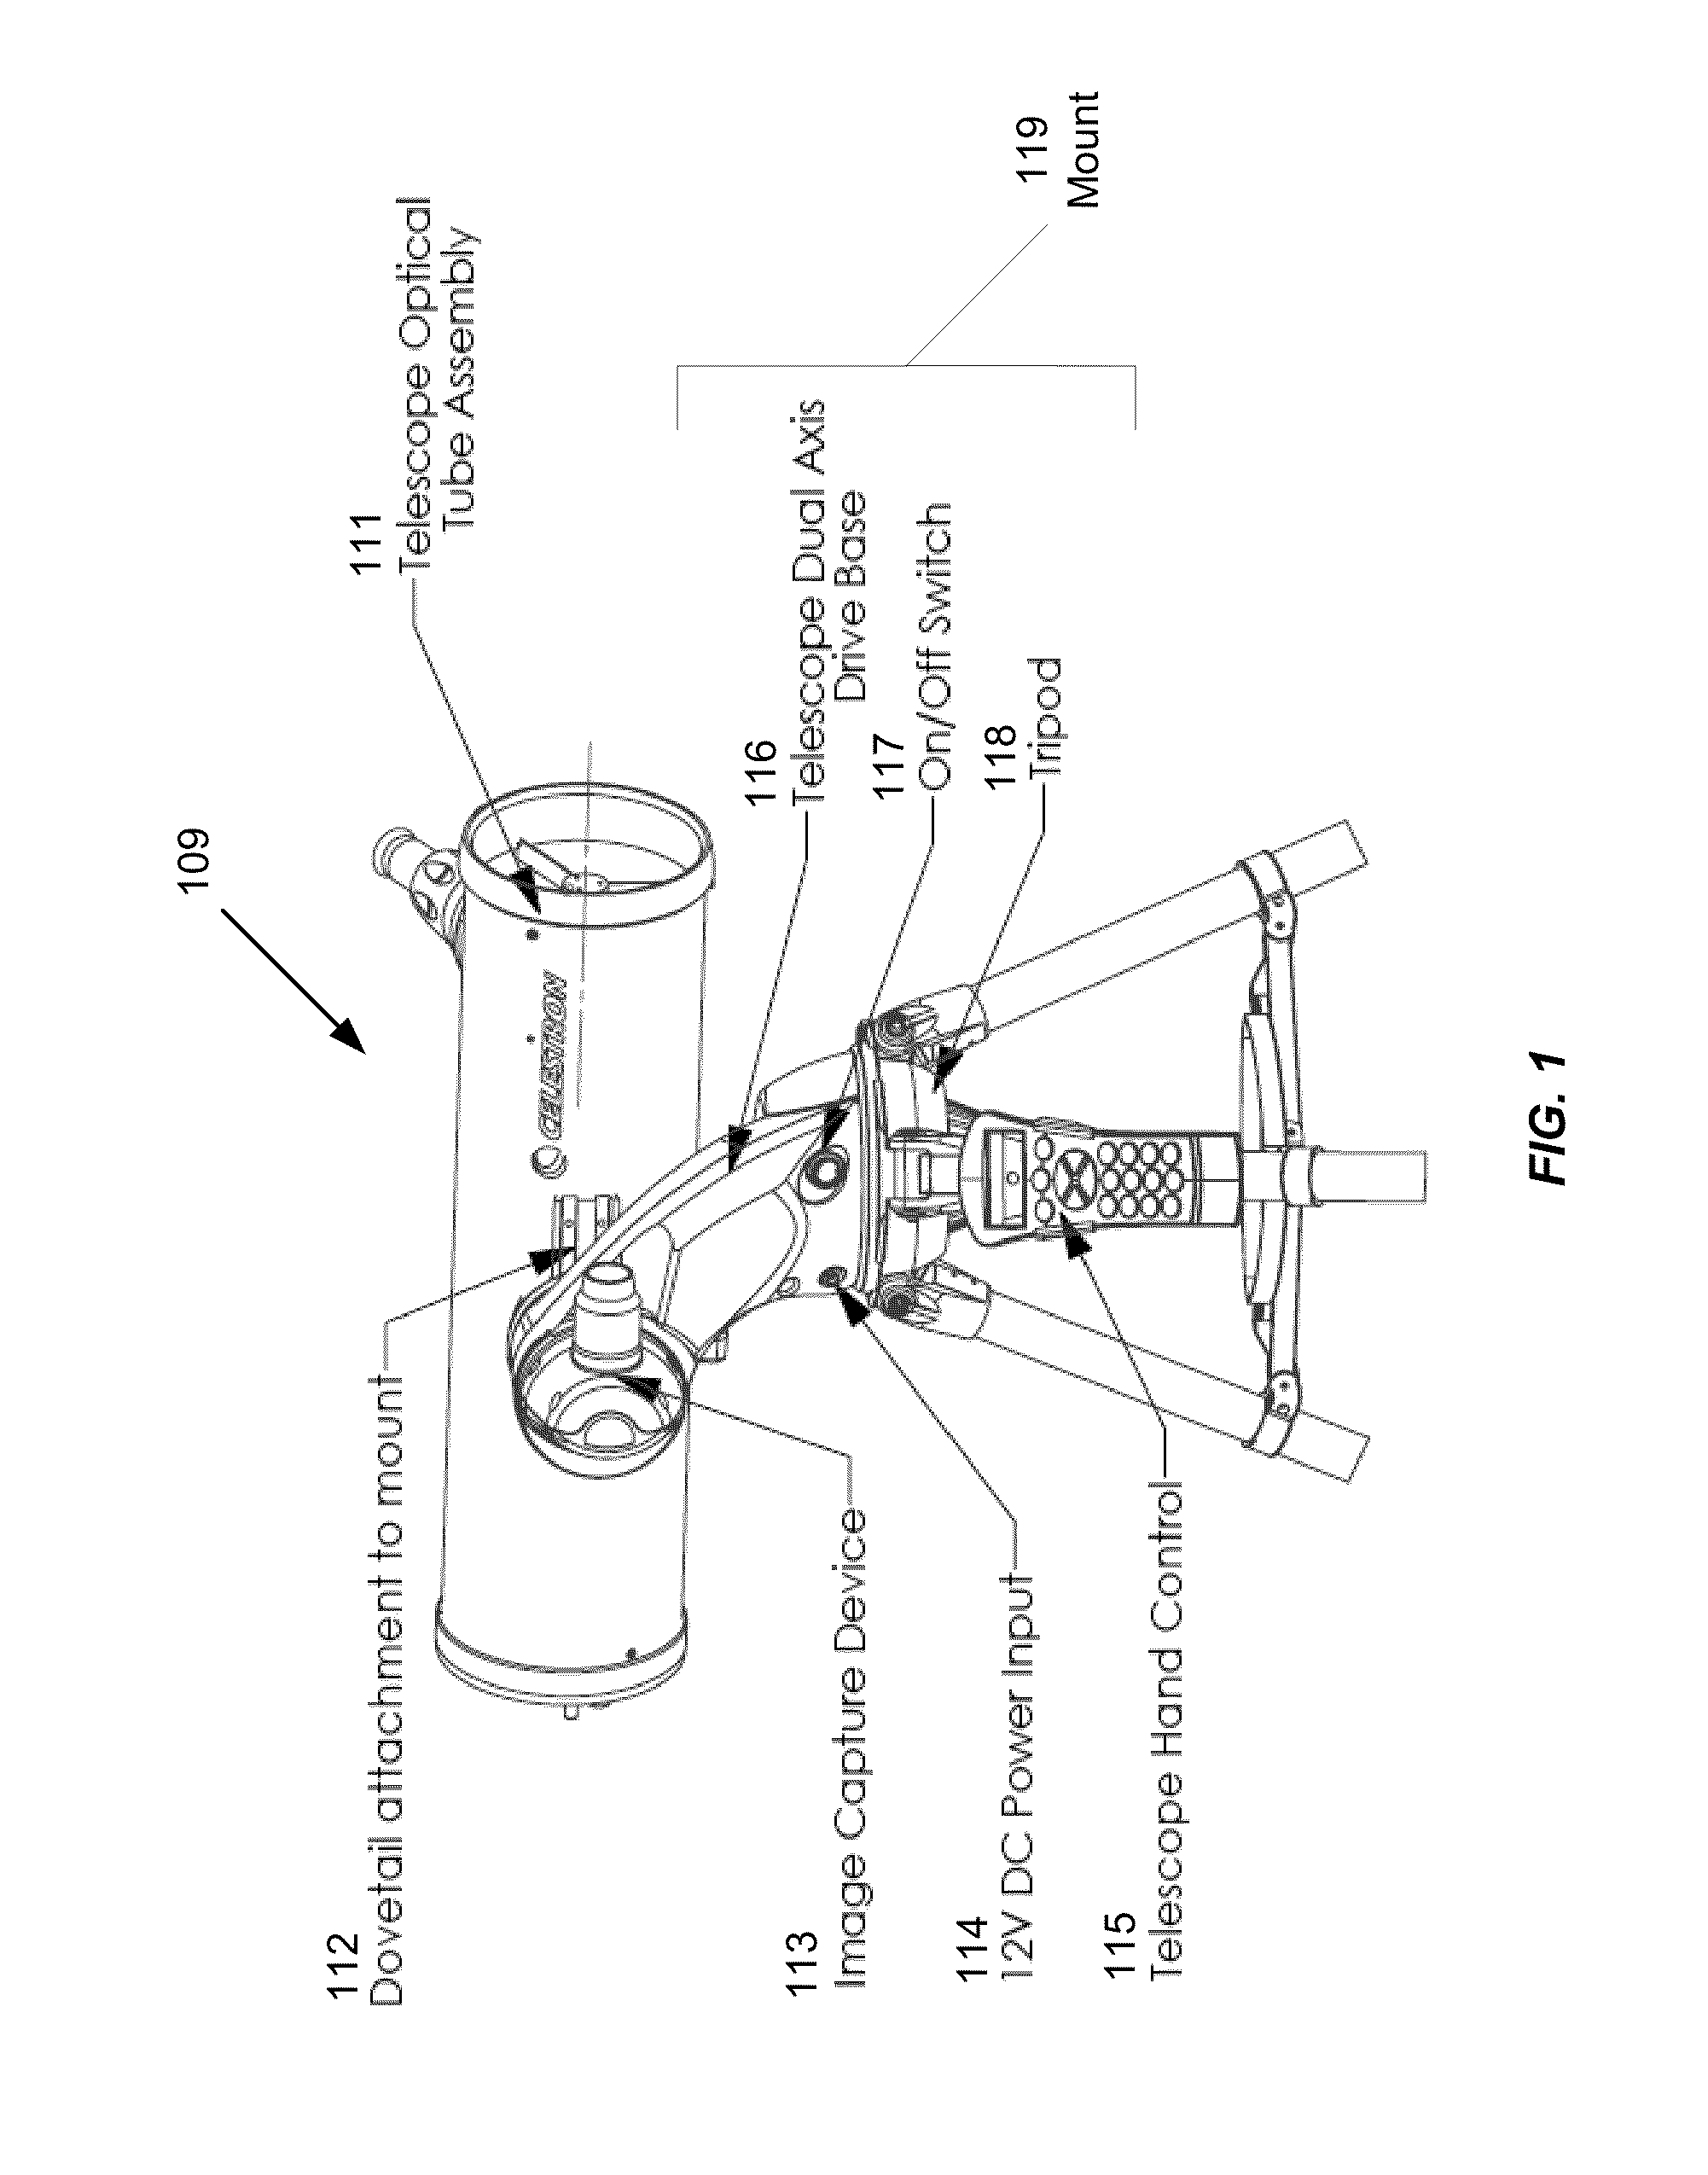 System and method for automatically aligning a telescope without requiring user intervention